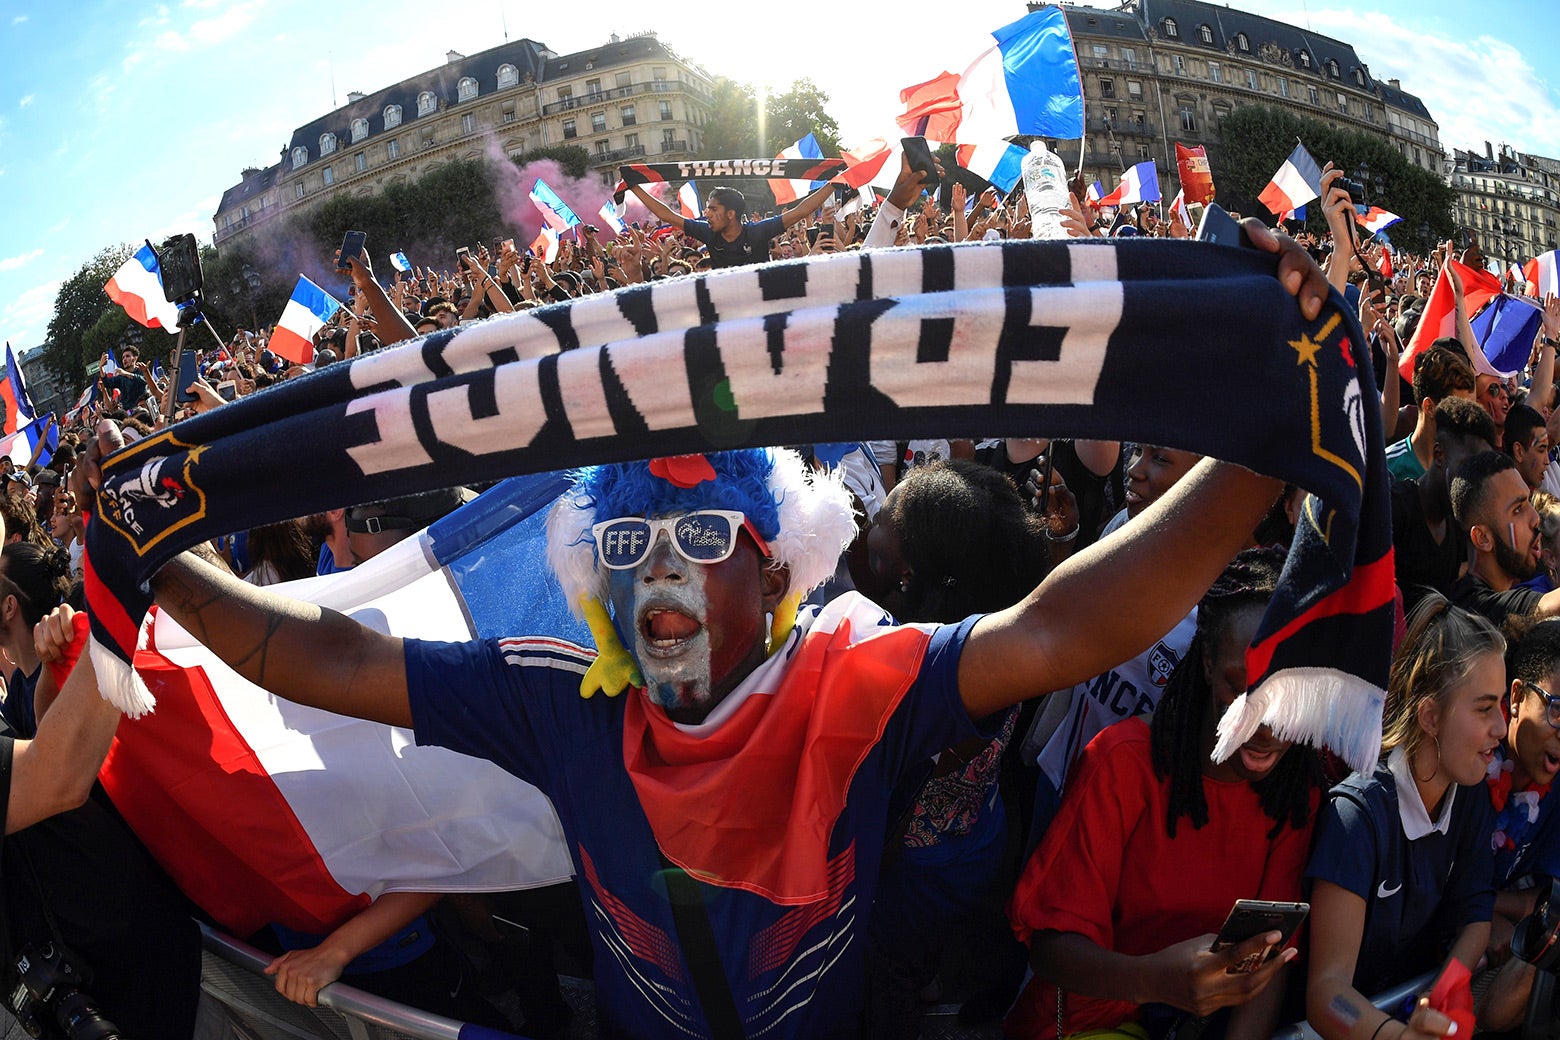 French football supporters in Paris watching the World Cup.